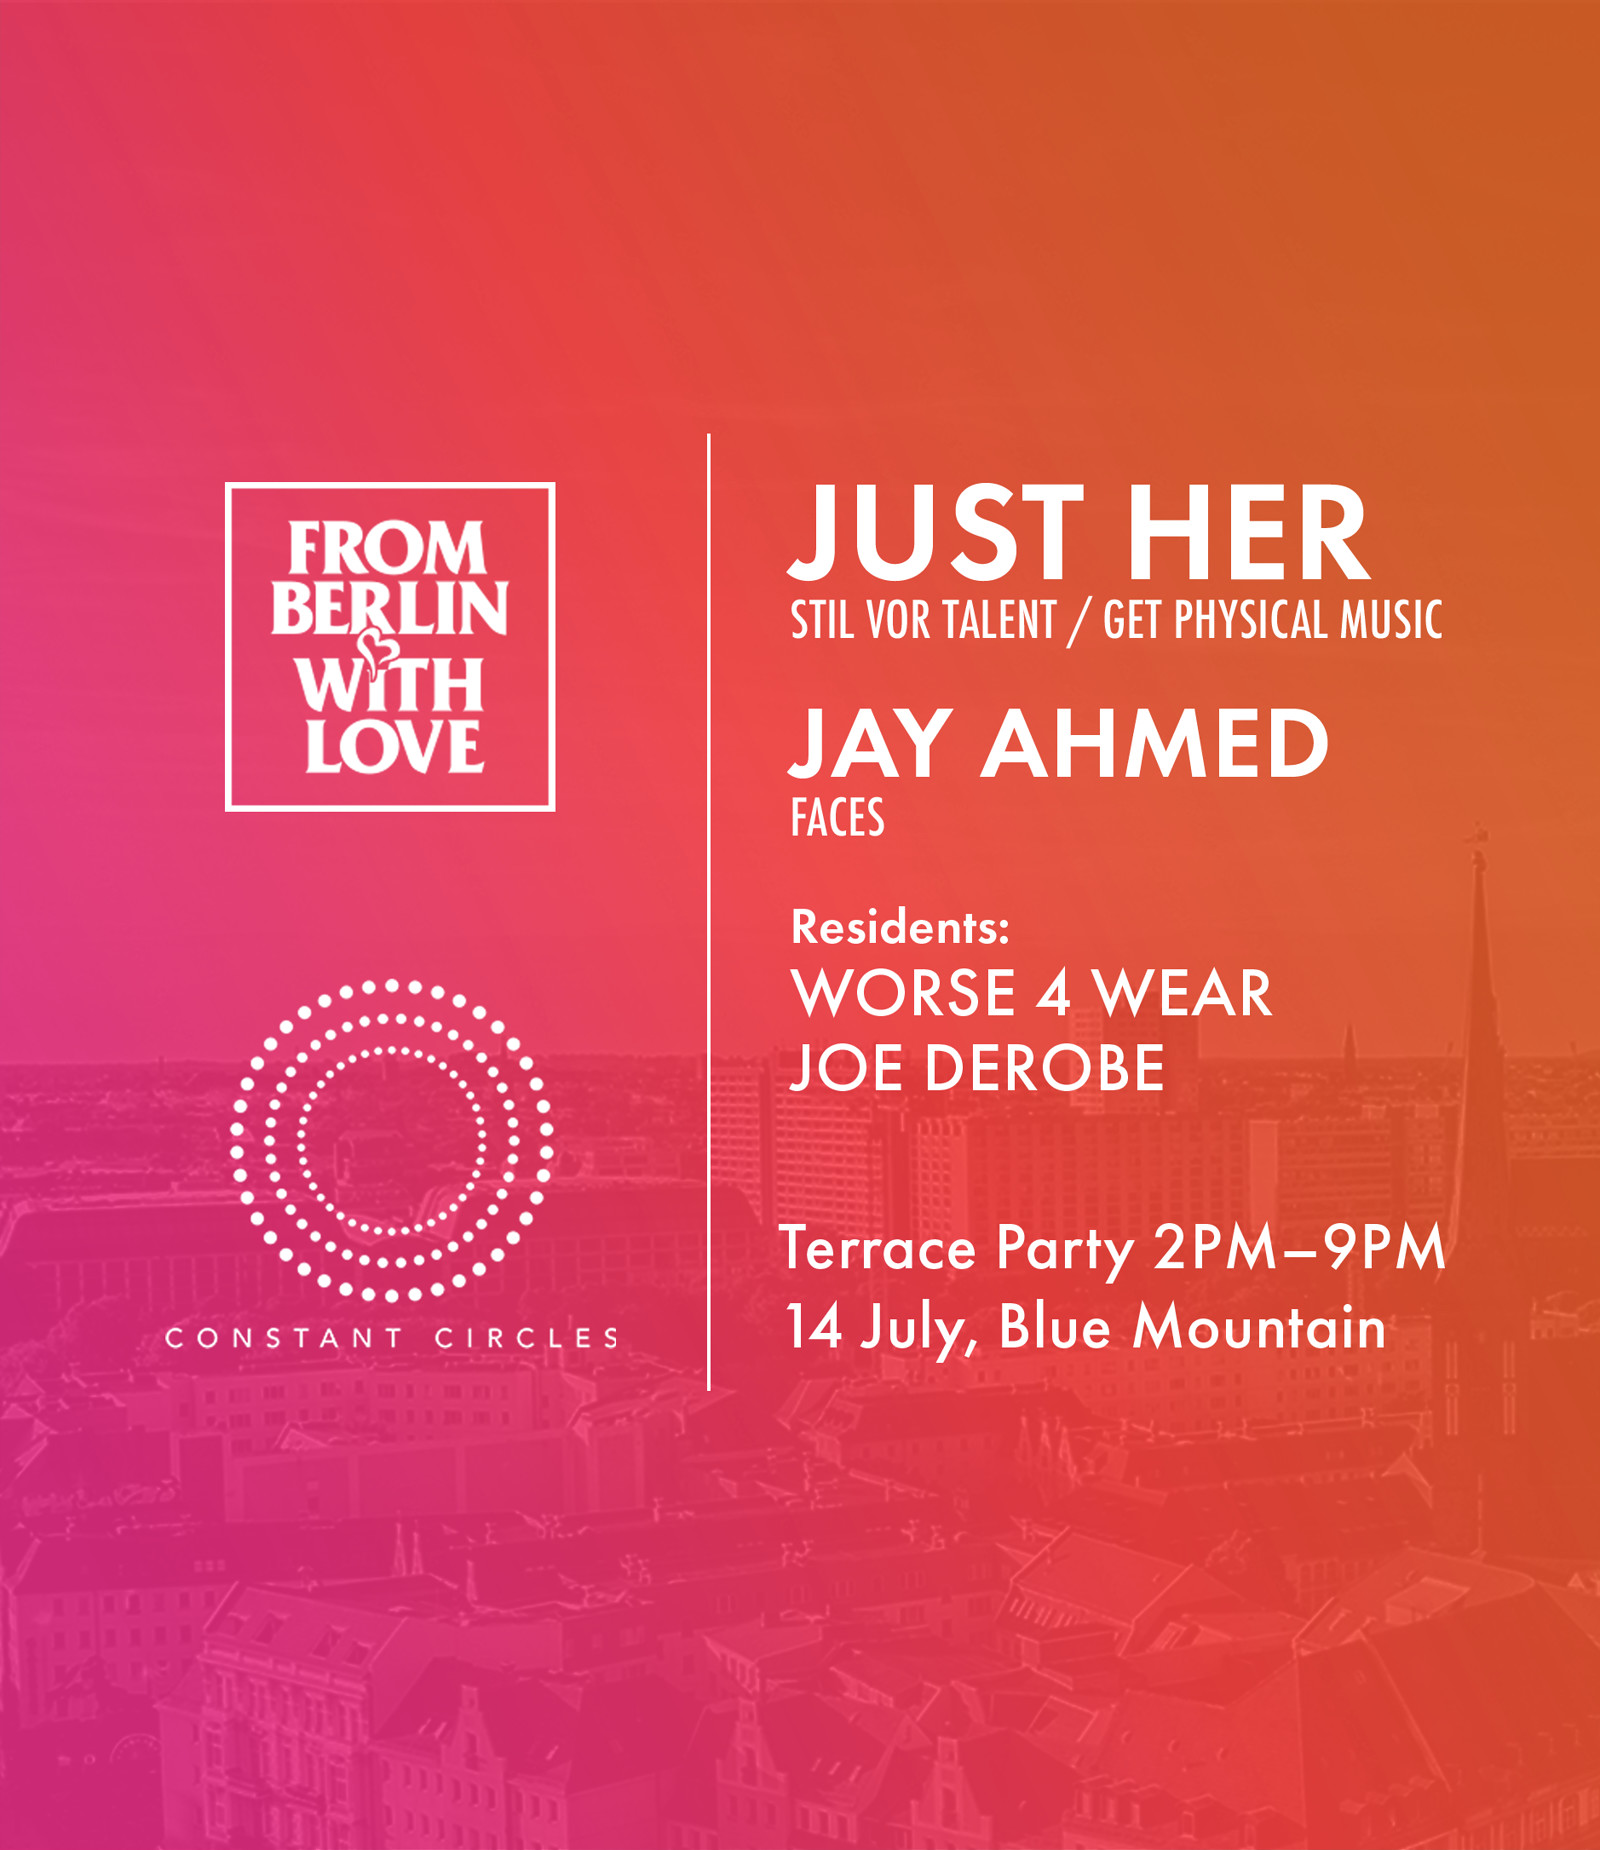 FBWL X Constant Circles Day Party w/ Just Her at Blue Mountain